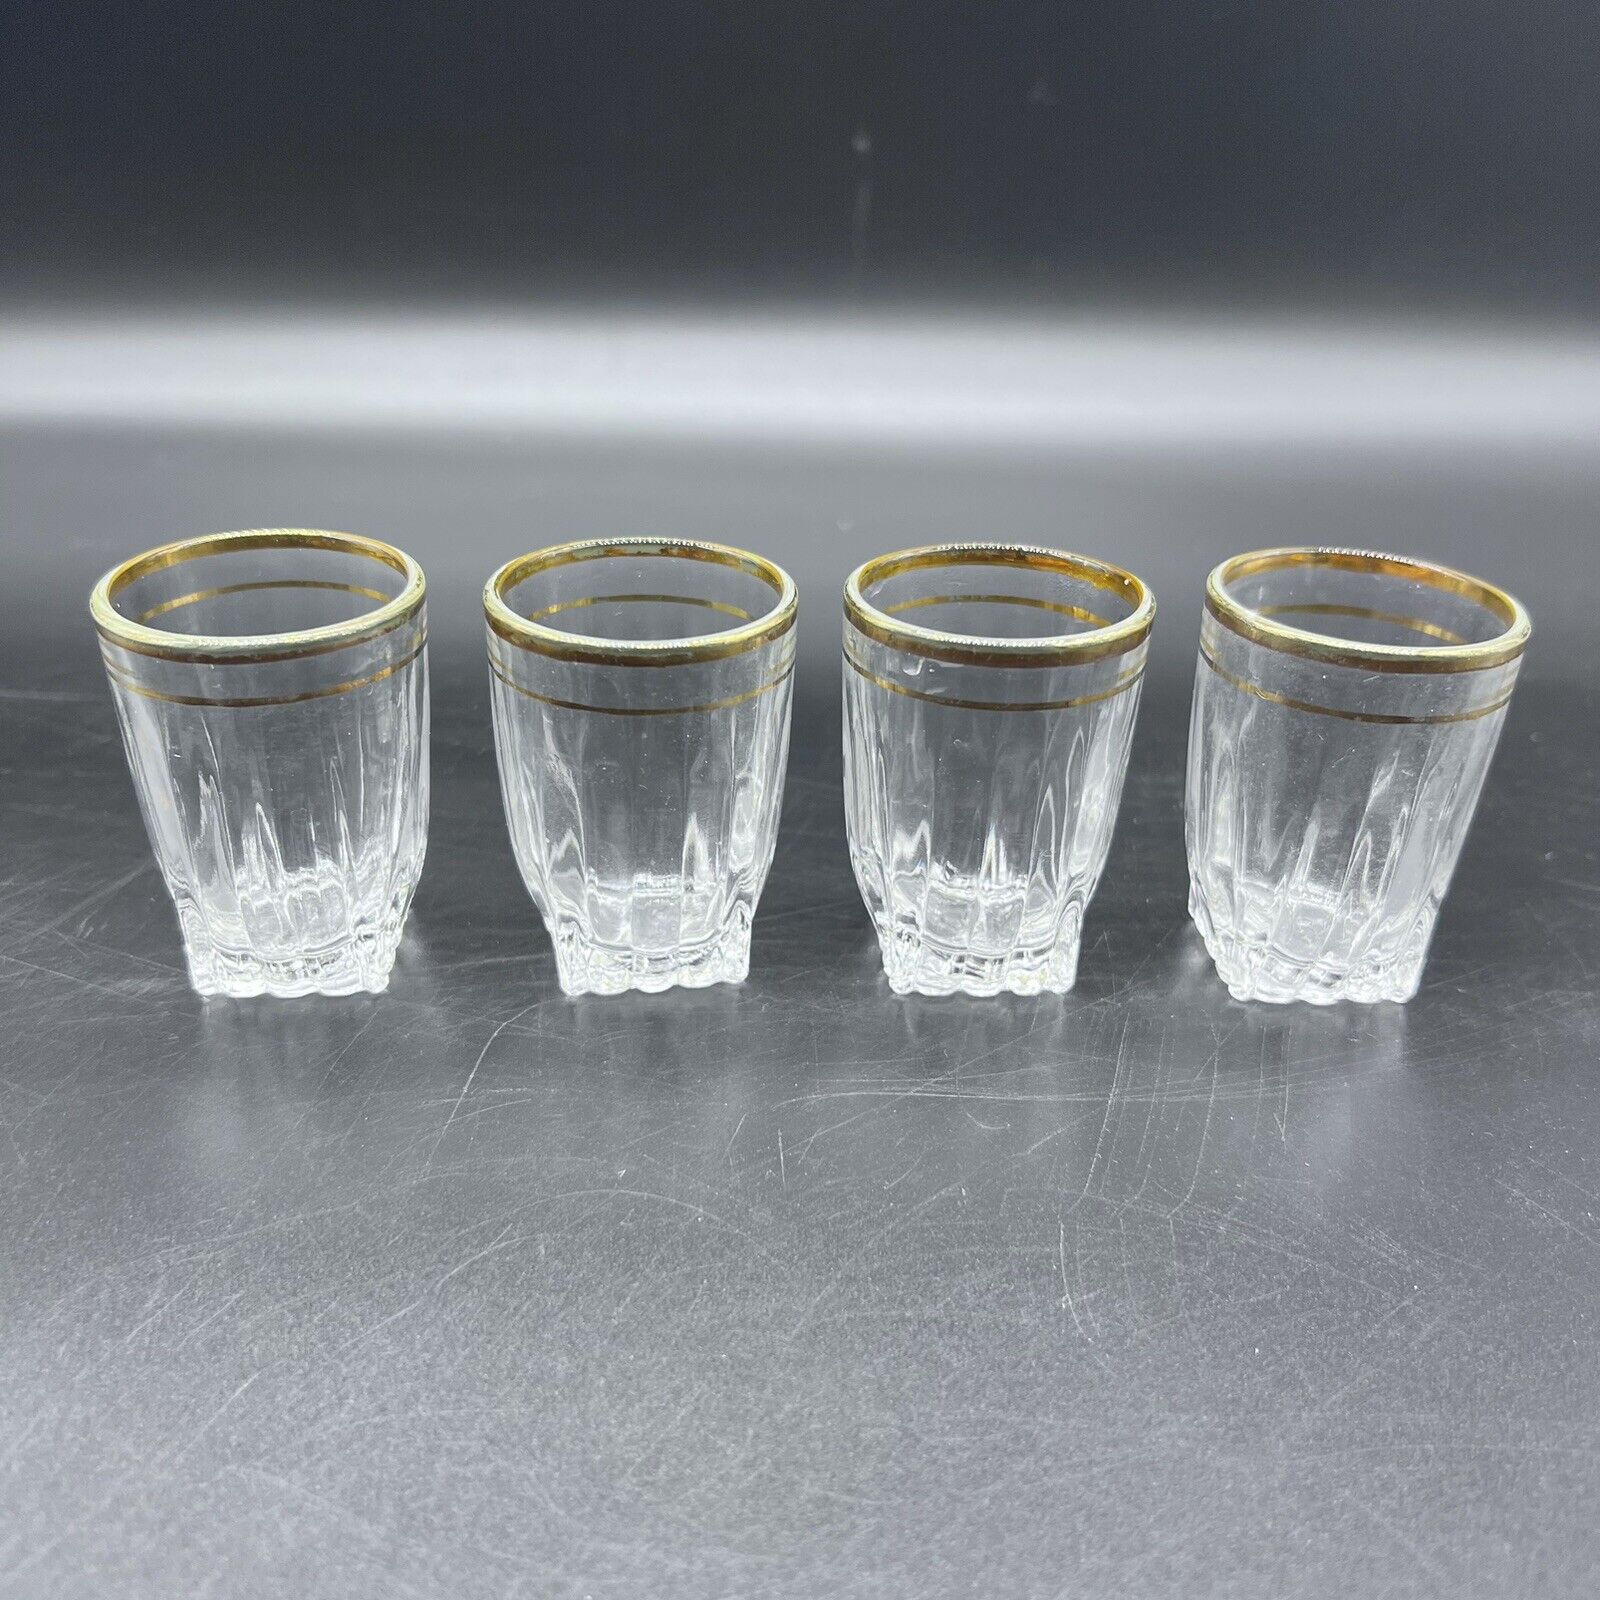 4 RARE Vintage Federal Glass Company Crystal and Gold-rimmed Shot Glasses